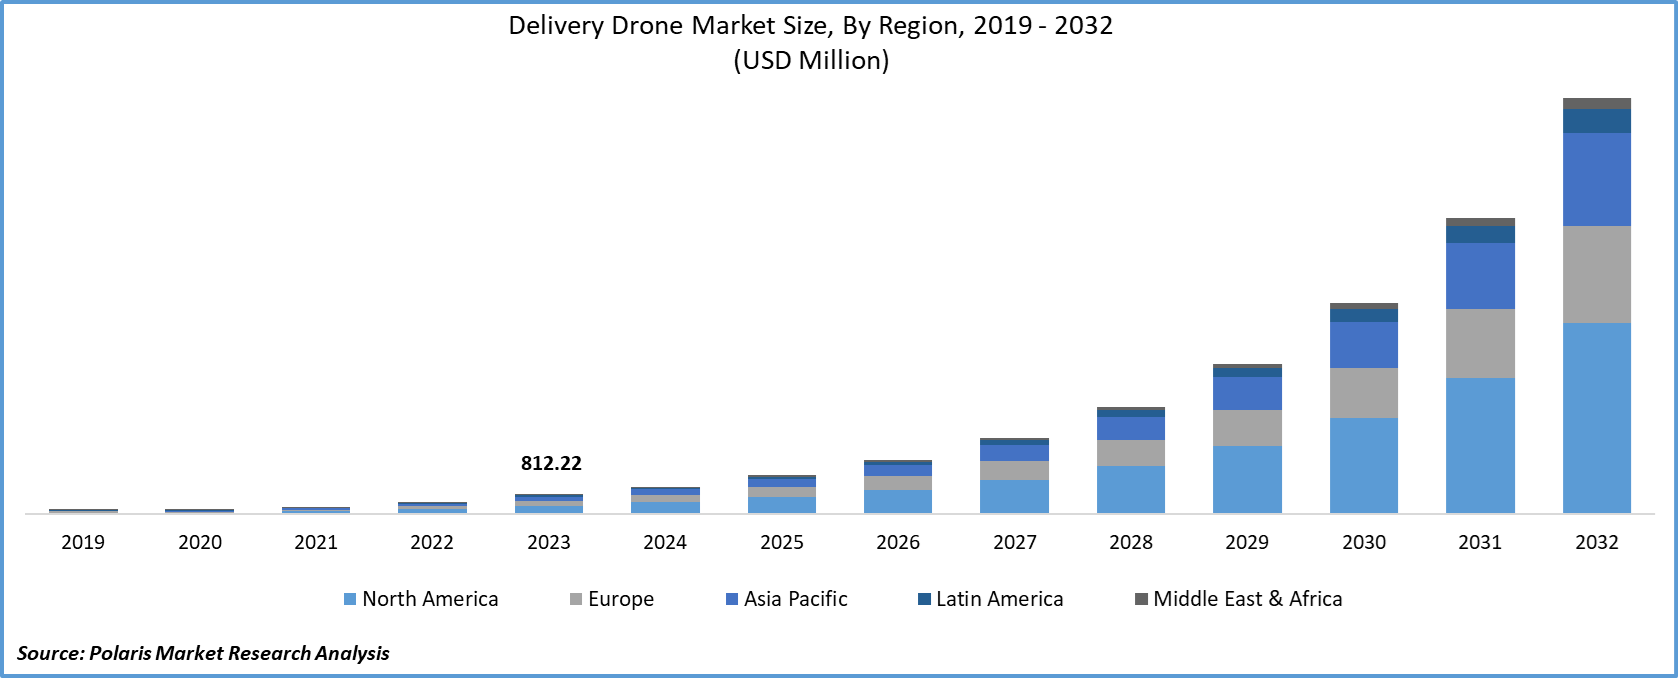 Delivery Drones Market size